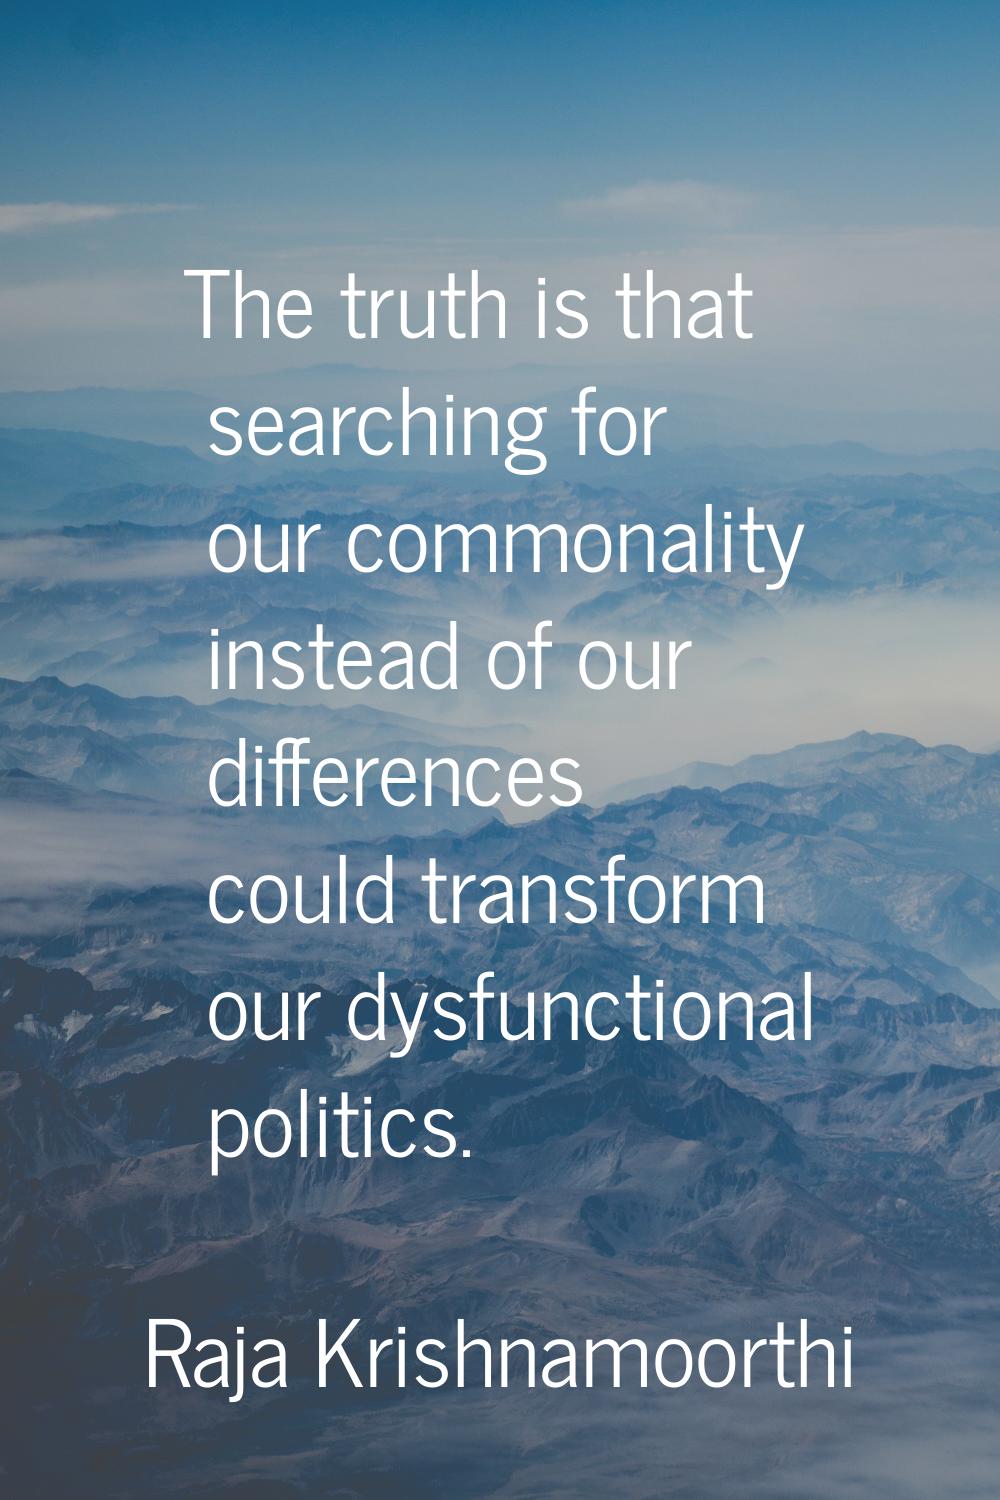 The truth is that searching for our commonality instead of our differences could transform our dysf